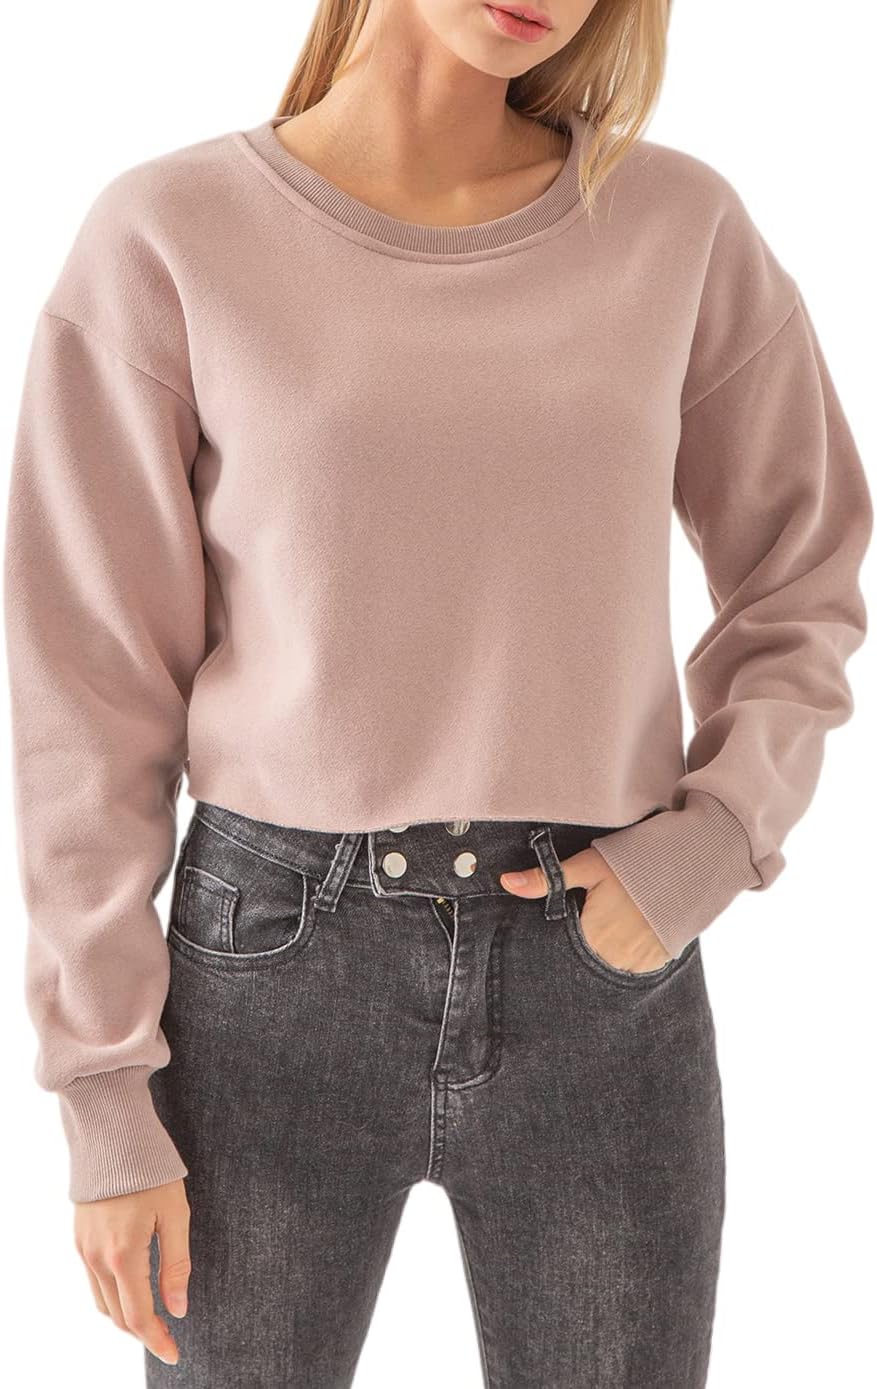 NTG Fad Mauve Taupe / XX-Large Cropped Hoodie Casual Fleece Crop Top for Fall Winter